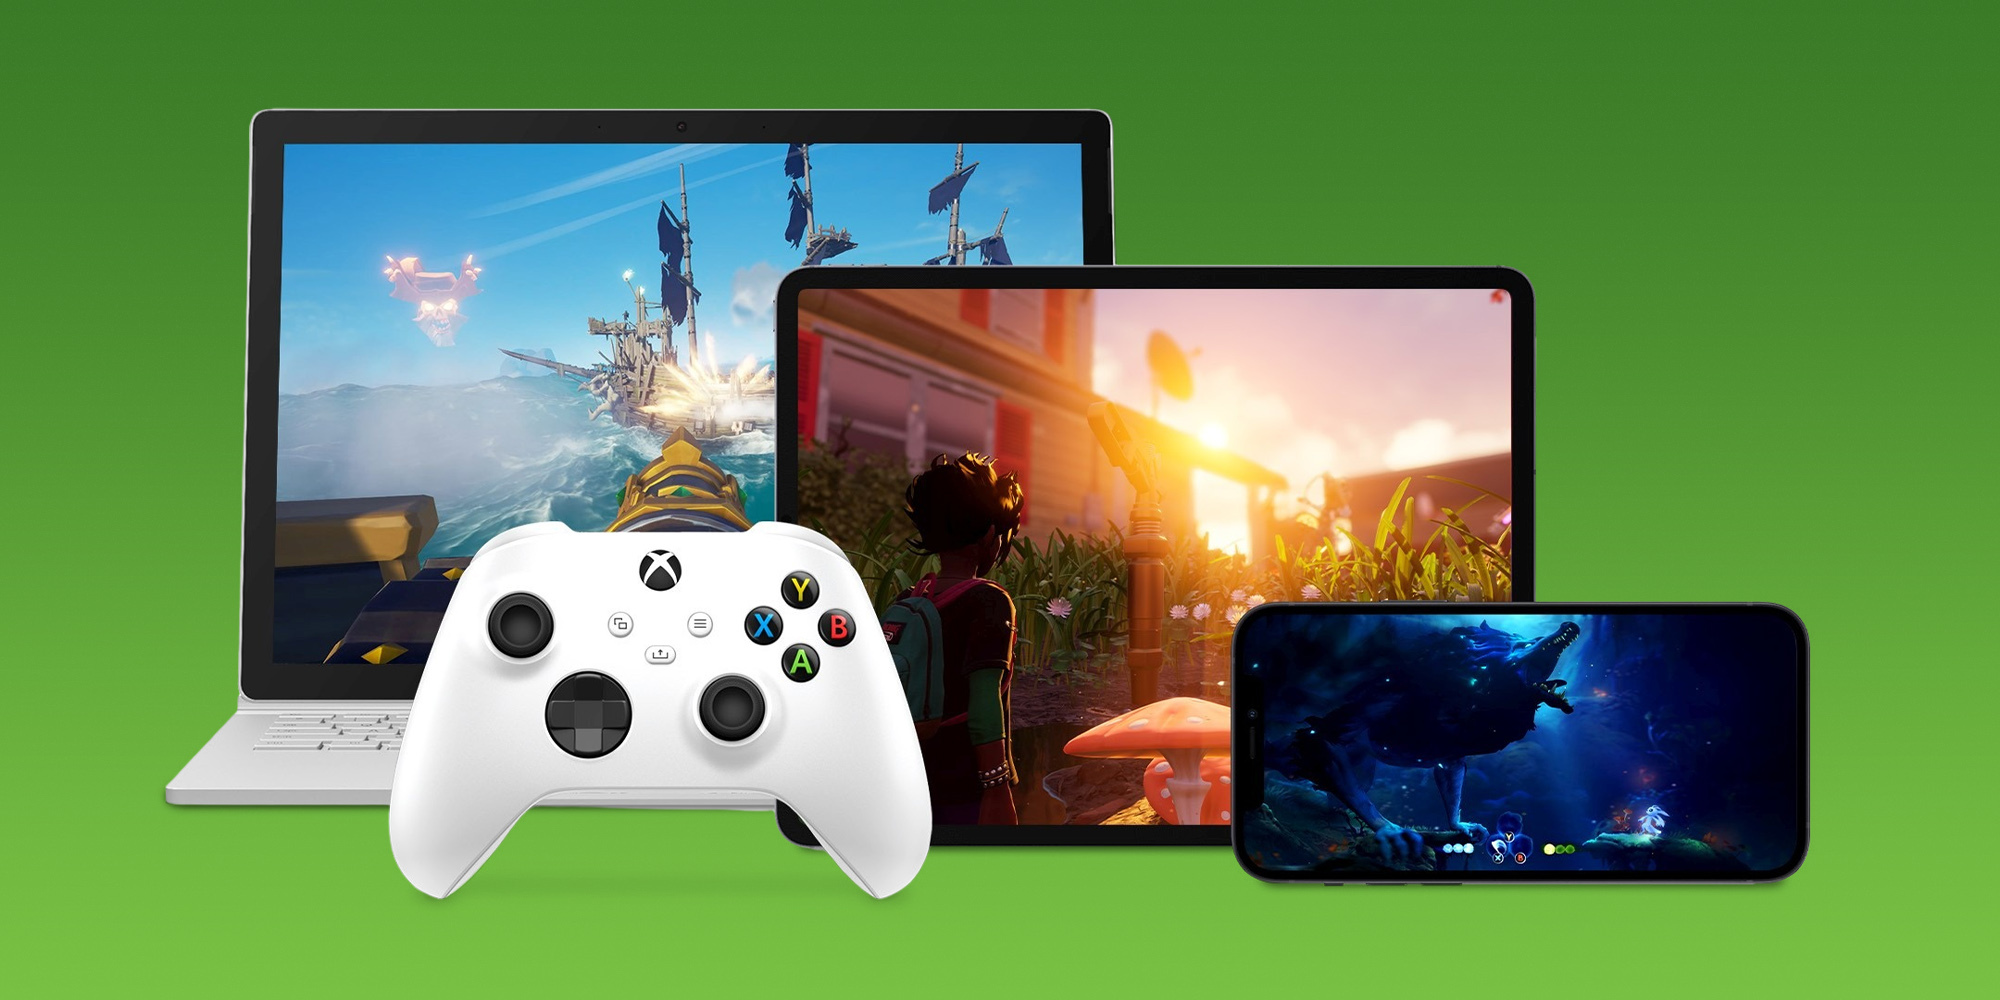 Microsoft's new Xbox TV app will let players stream games on new